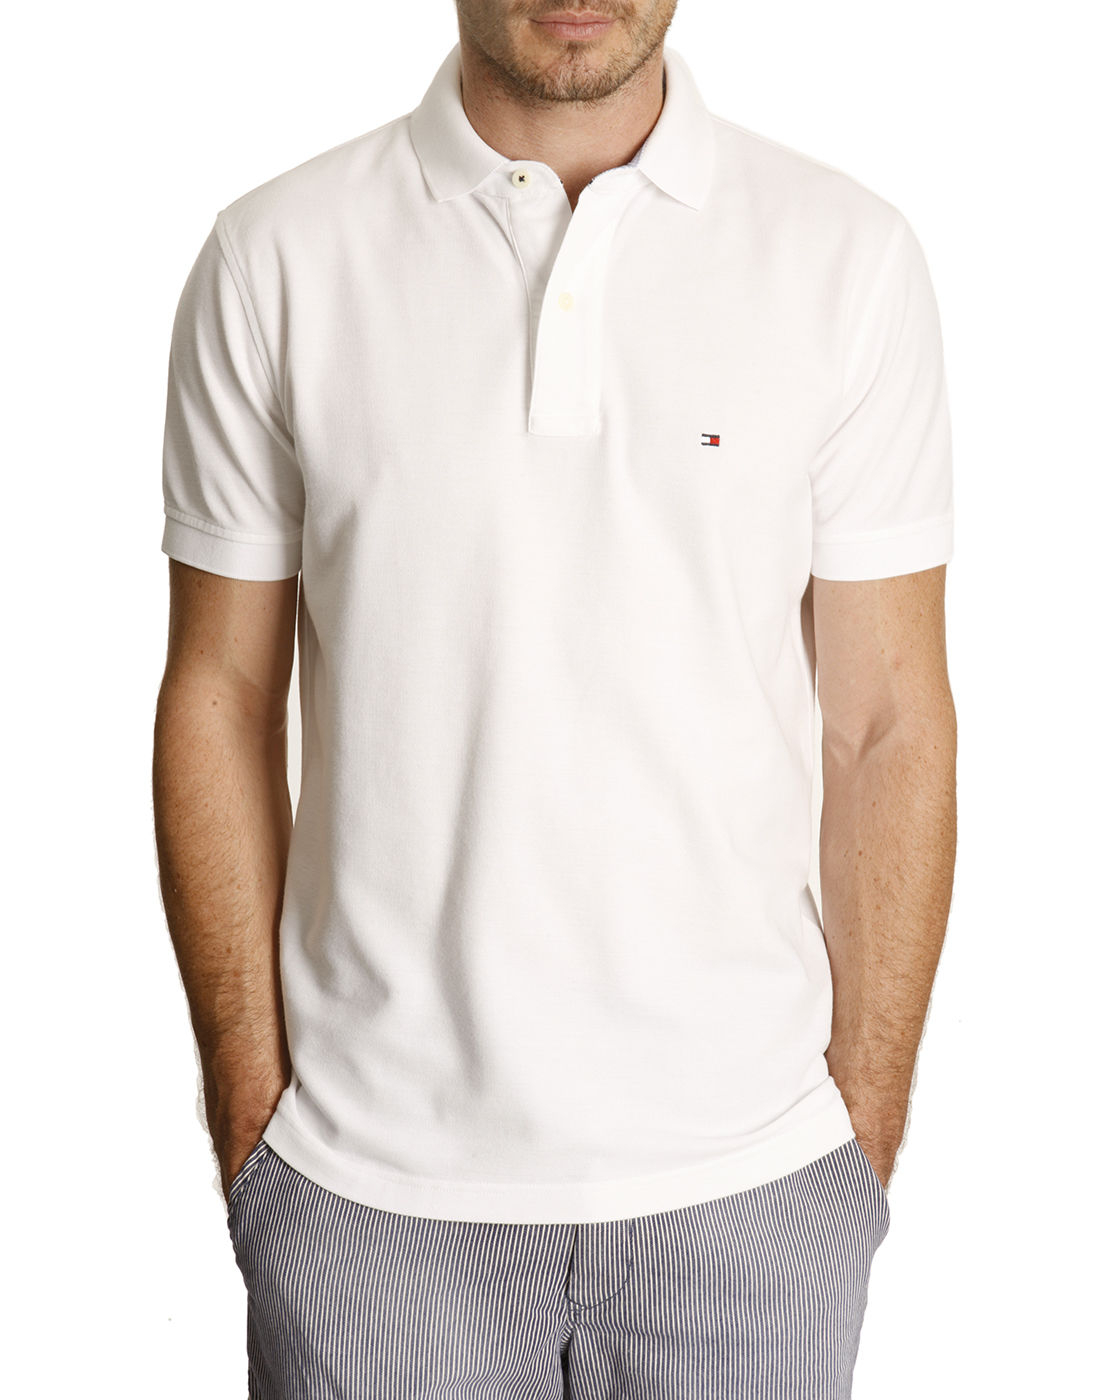 Tommy Hilfiger White Slim Fit Pique Stretch Polo Shirt in White for Men